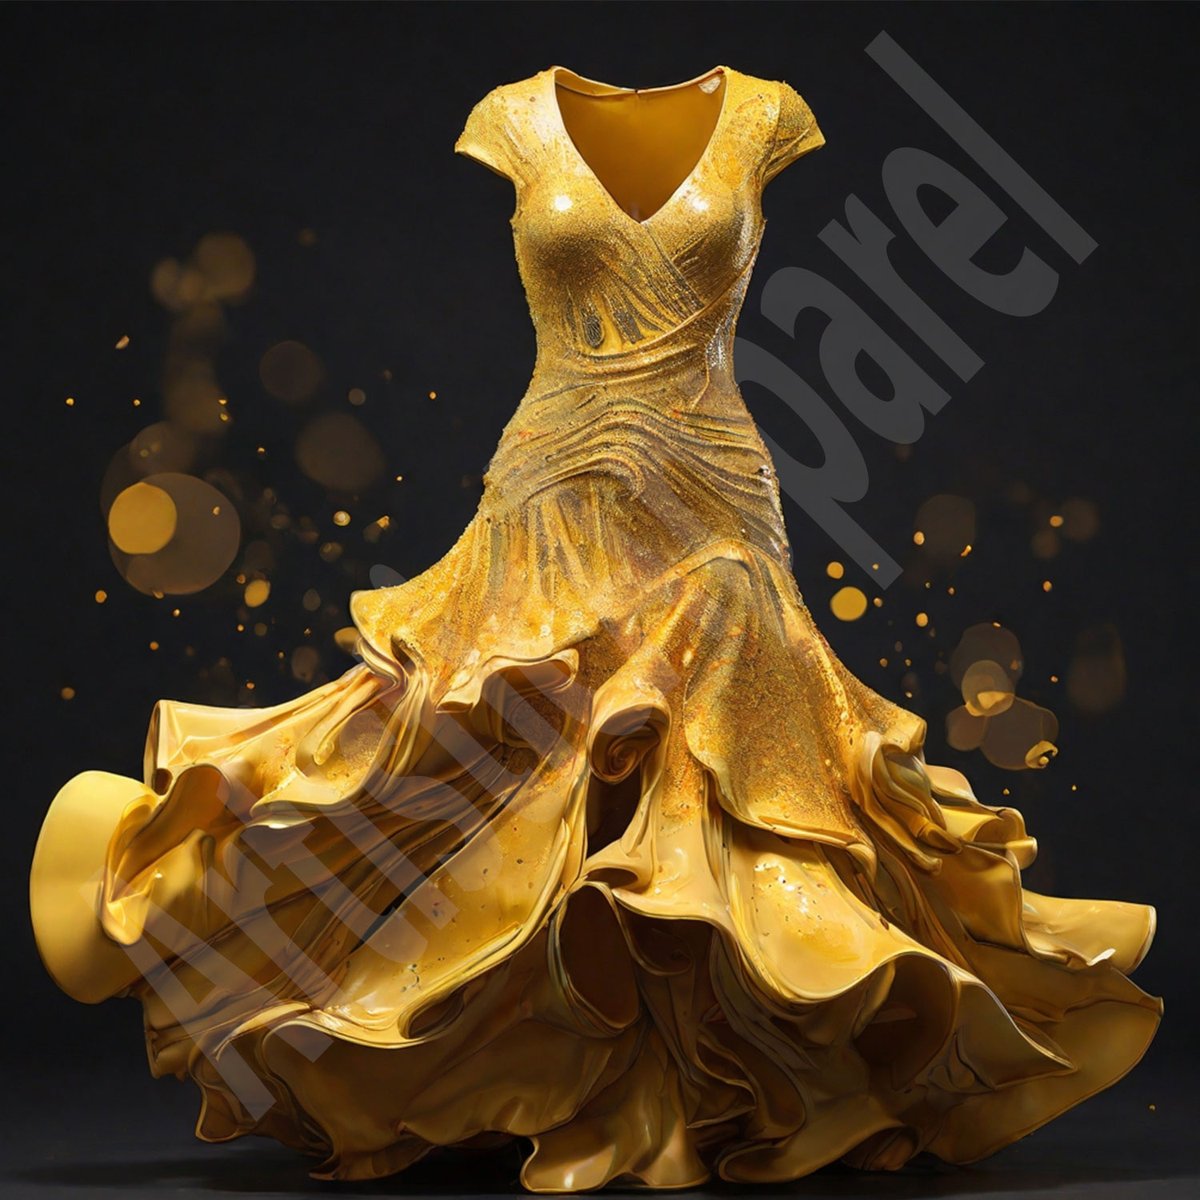 Turn heads in our radiant yellow gown! 💛✨ Follow us for more fashion inspo and drop a comment to let us know your thoughts! #FashionGoals #MustHave #JoinTheParty #Fashionista #hautecouture #fashionstyle #trends #fashionblogger